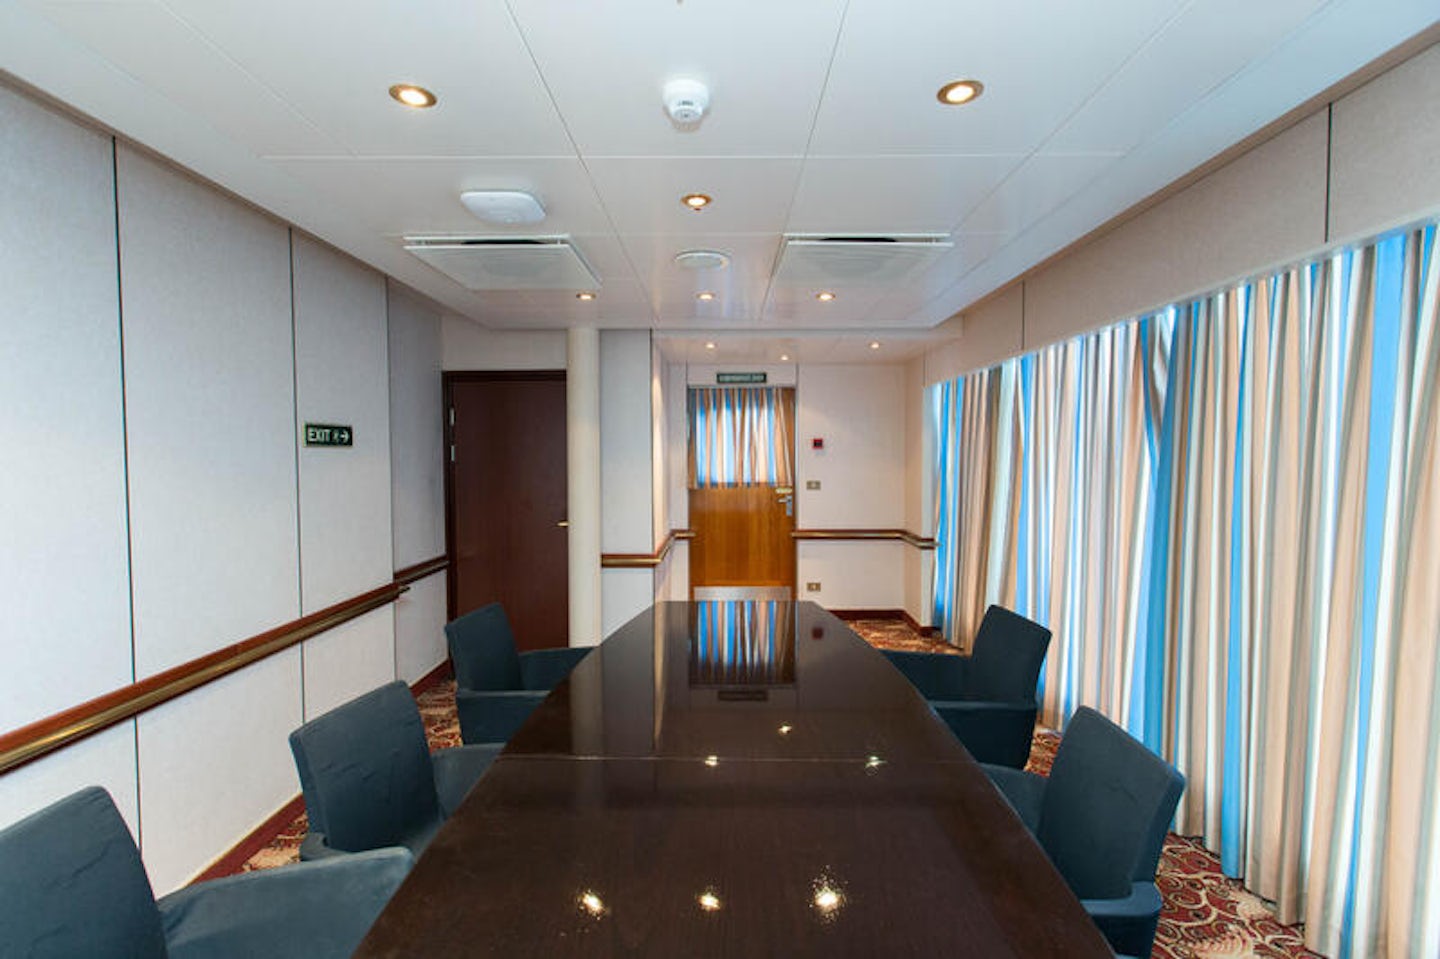 Conference Room on Crown Princess